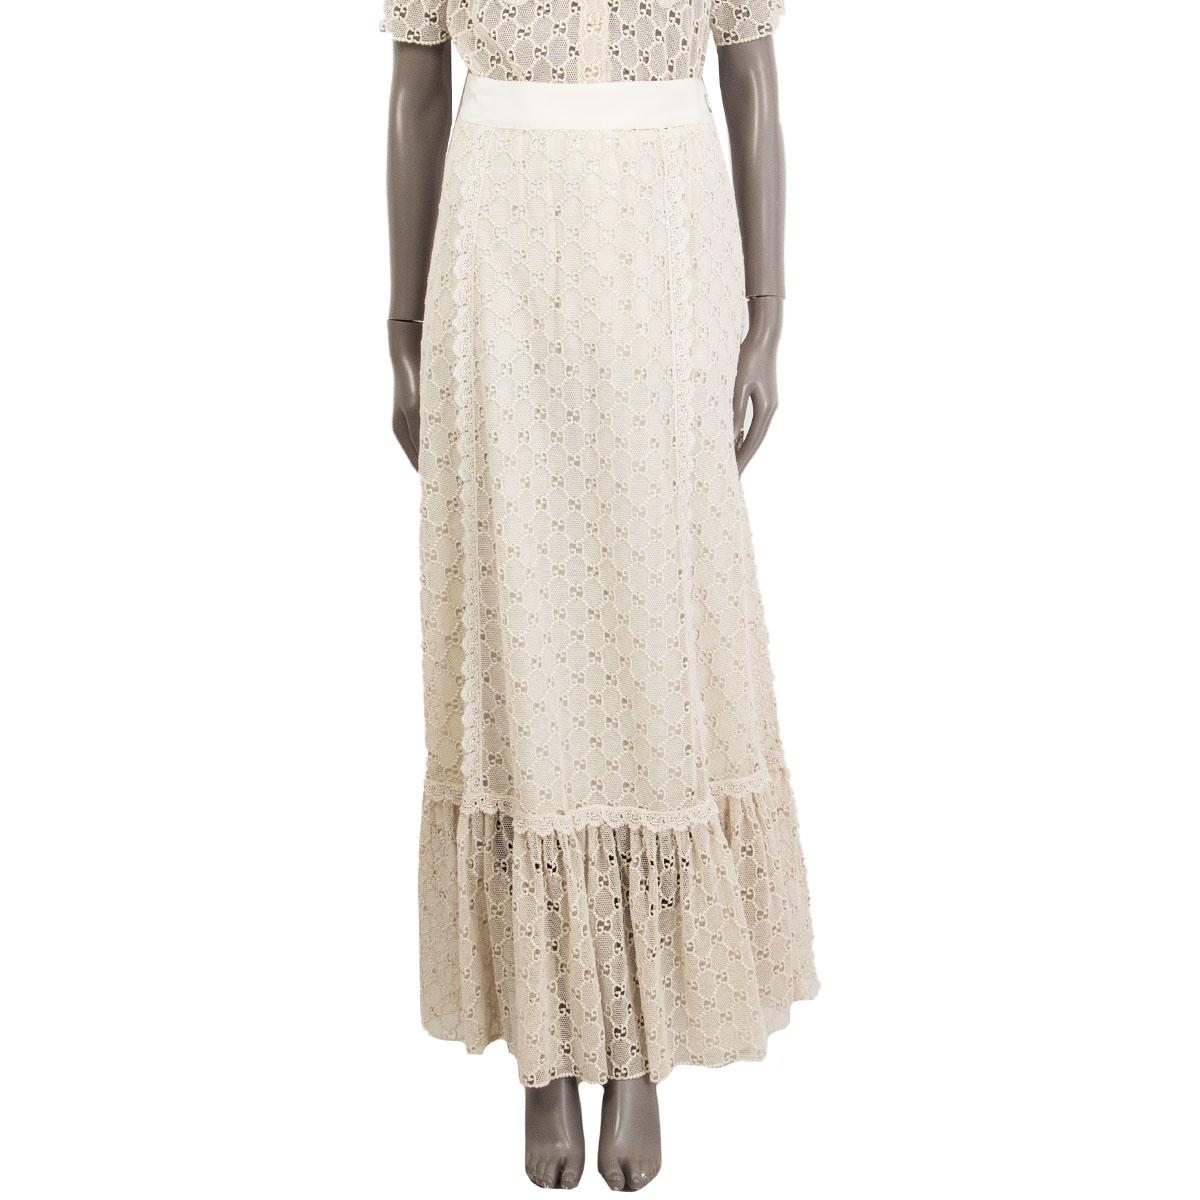 100% authentic Gucci GG macrame maxi skirt in off-white cotton (77%) and polyester (23%) (please note the content tag has been removed). Ribbon waist-band. Opens with a zipper in the back. Detachable lining in off-white silk. Has been worn and is in